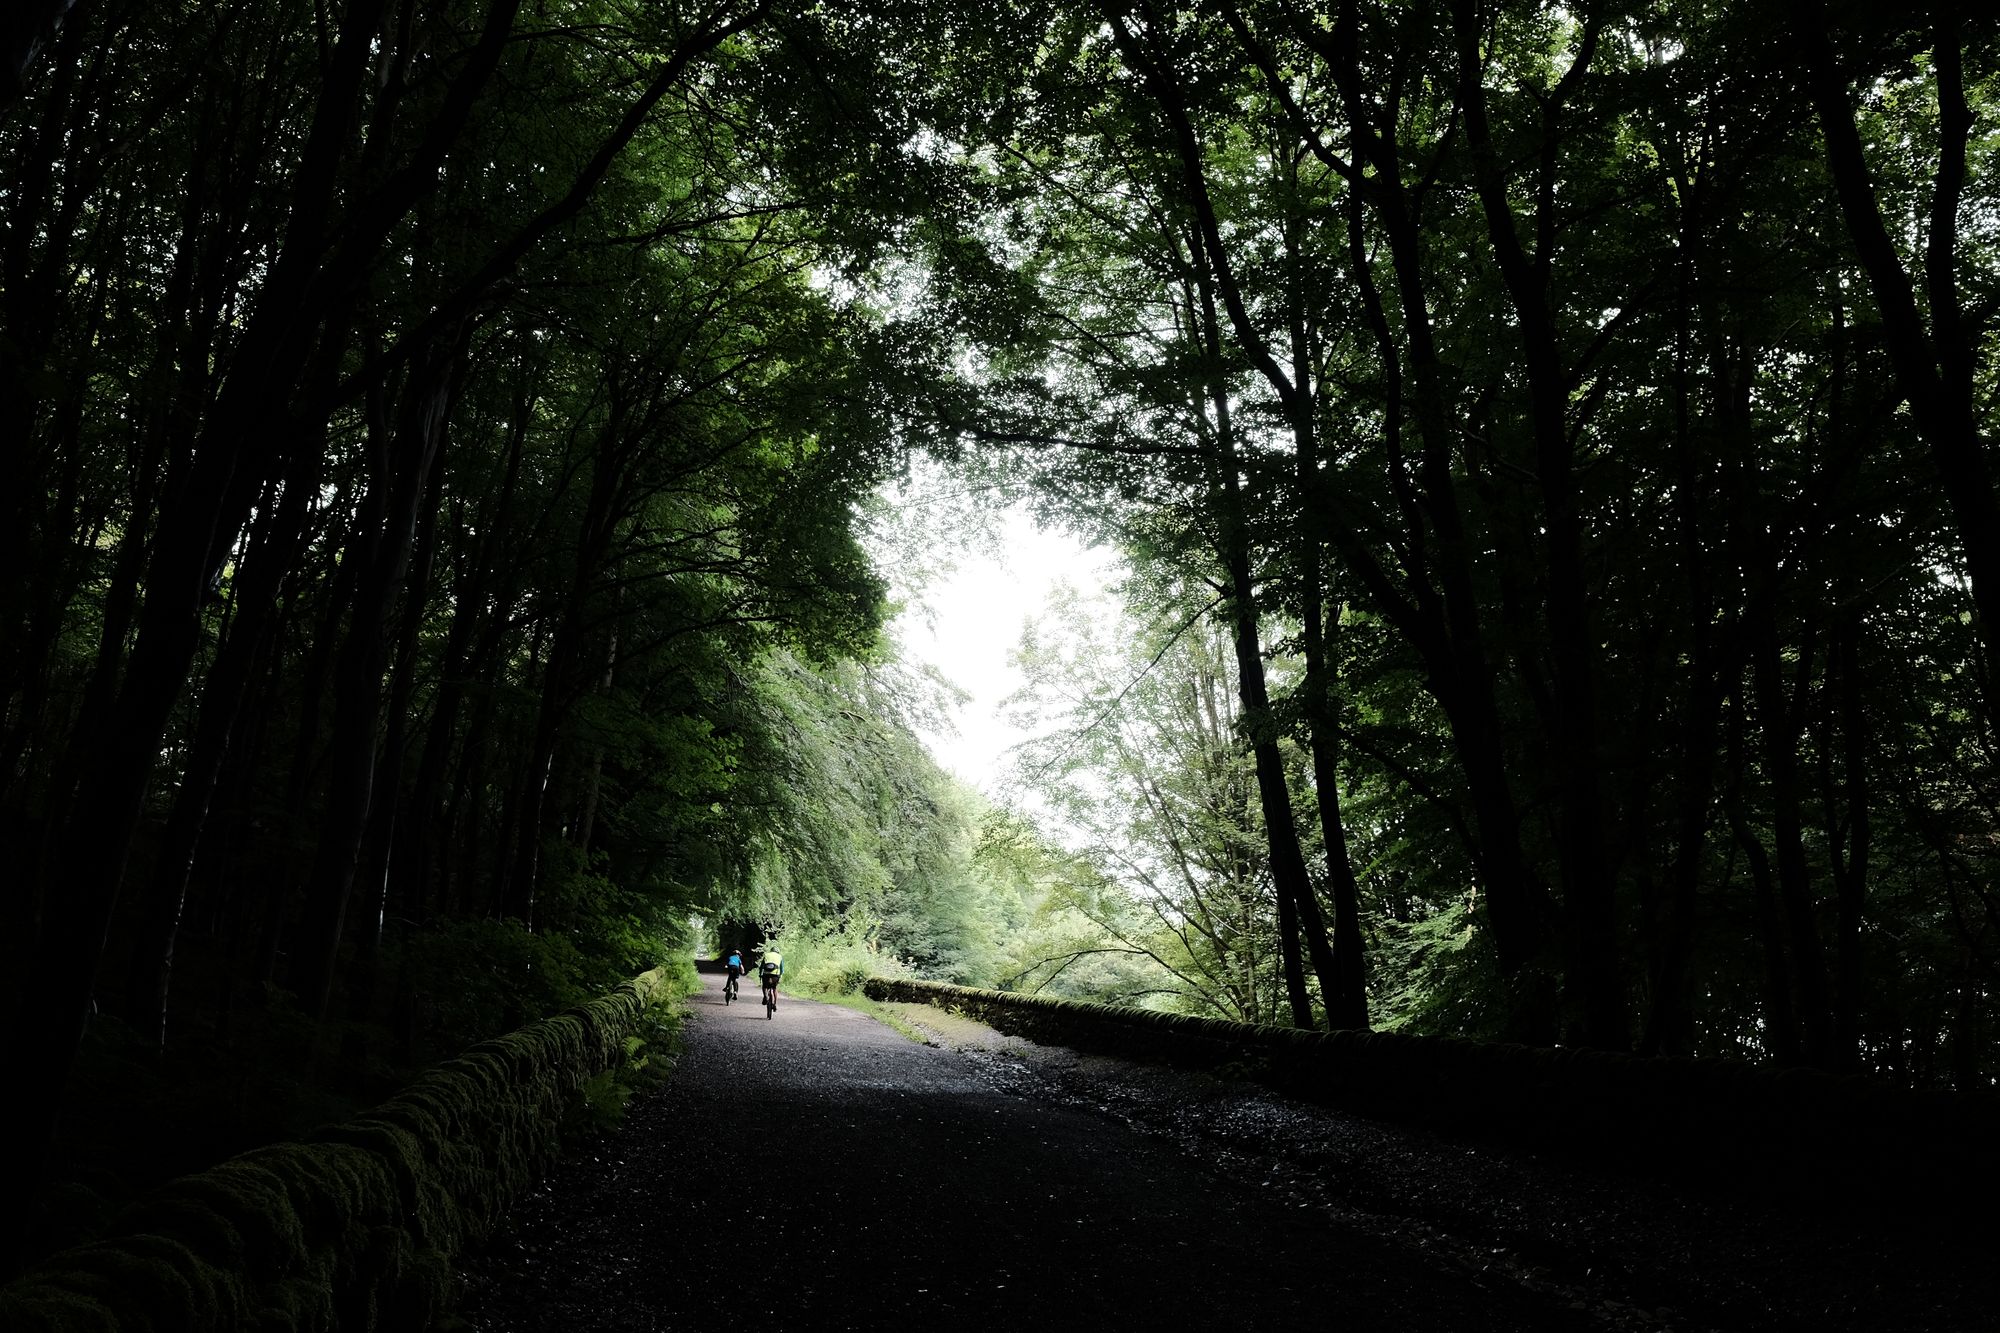 Two cyclists are visible in the distance riding up a steep incline in a dark forest.